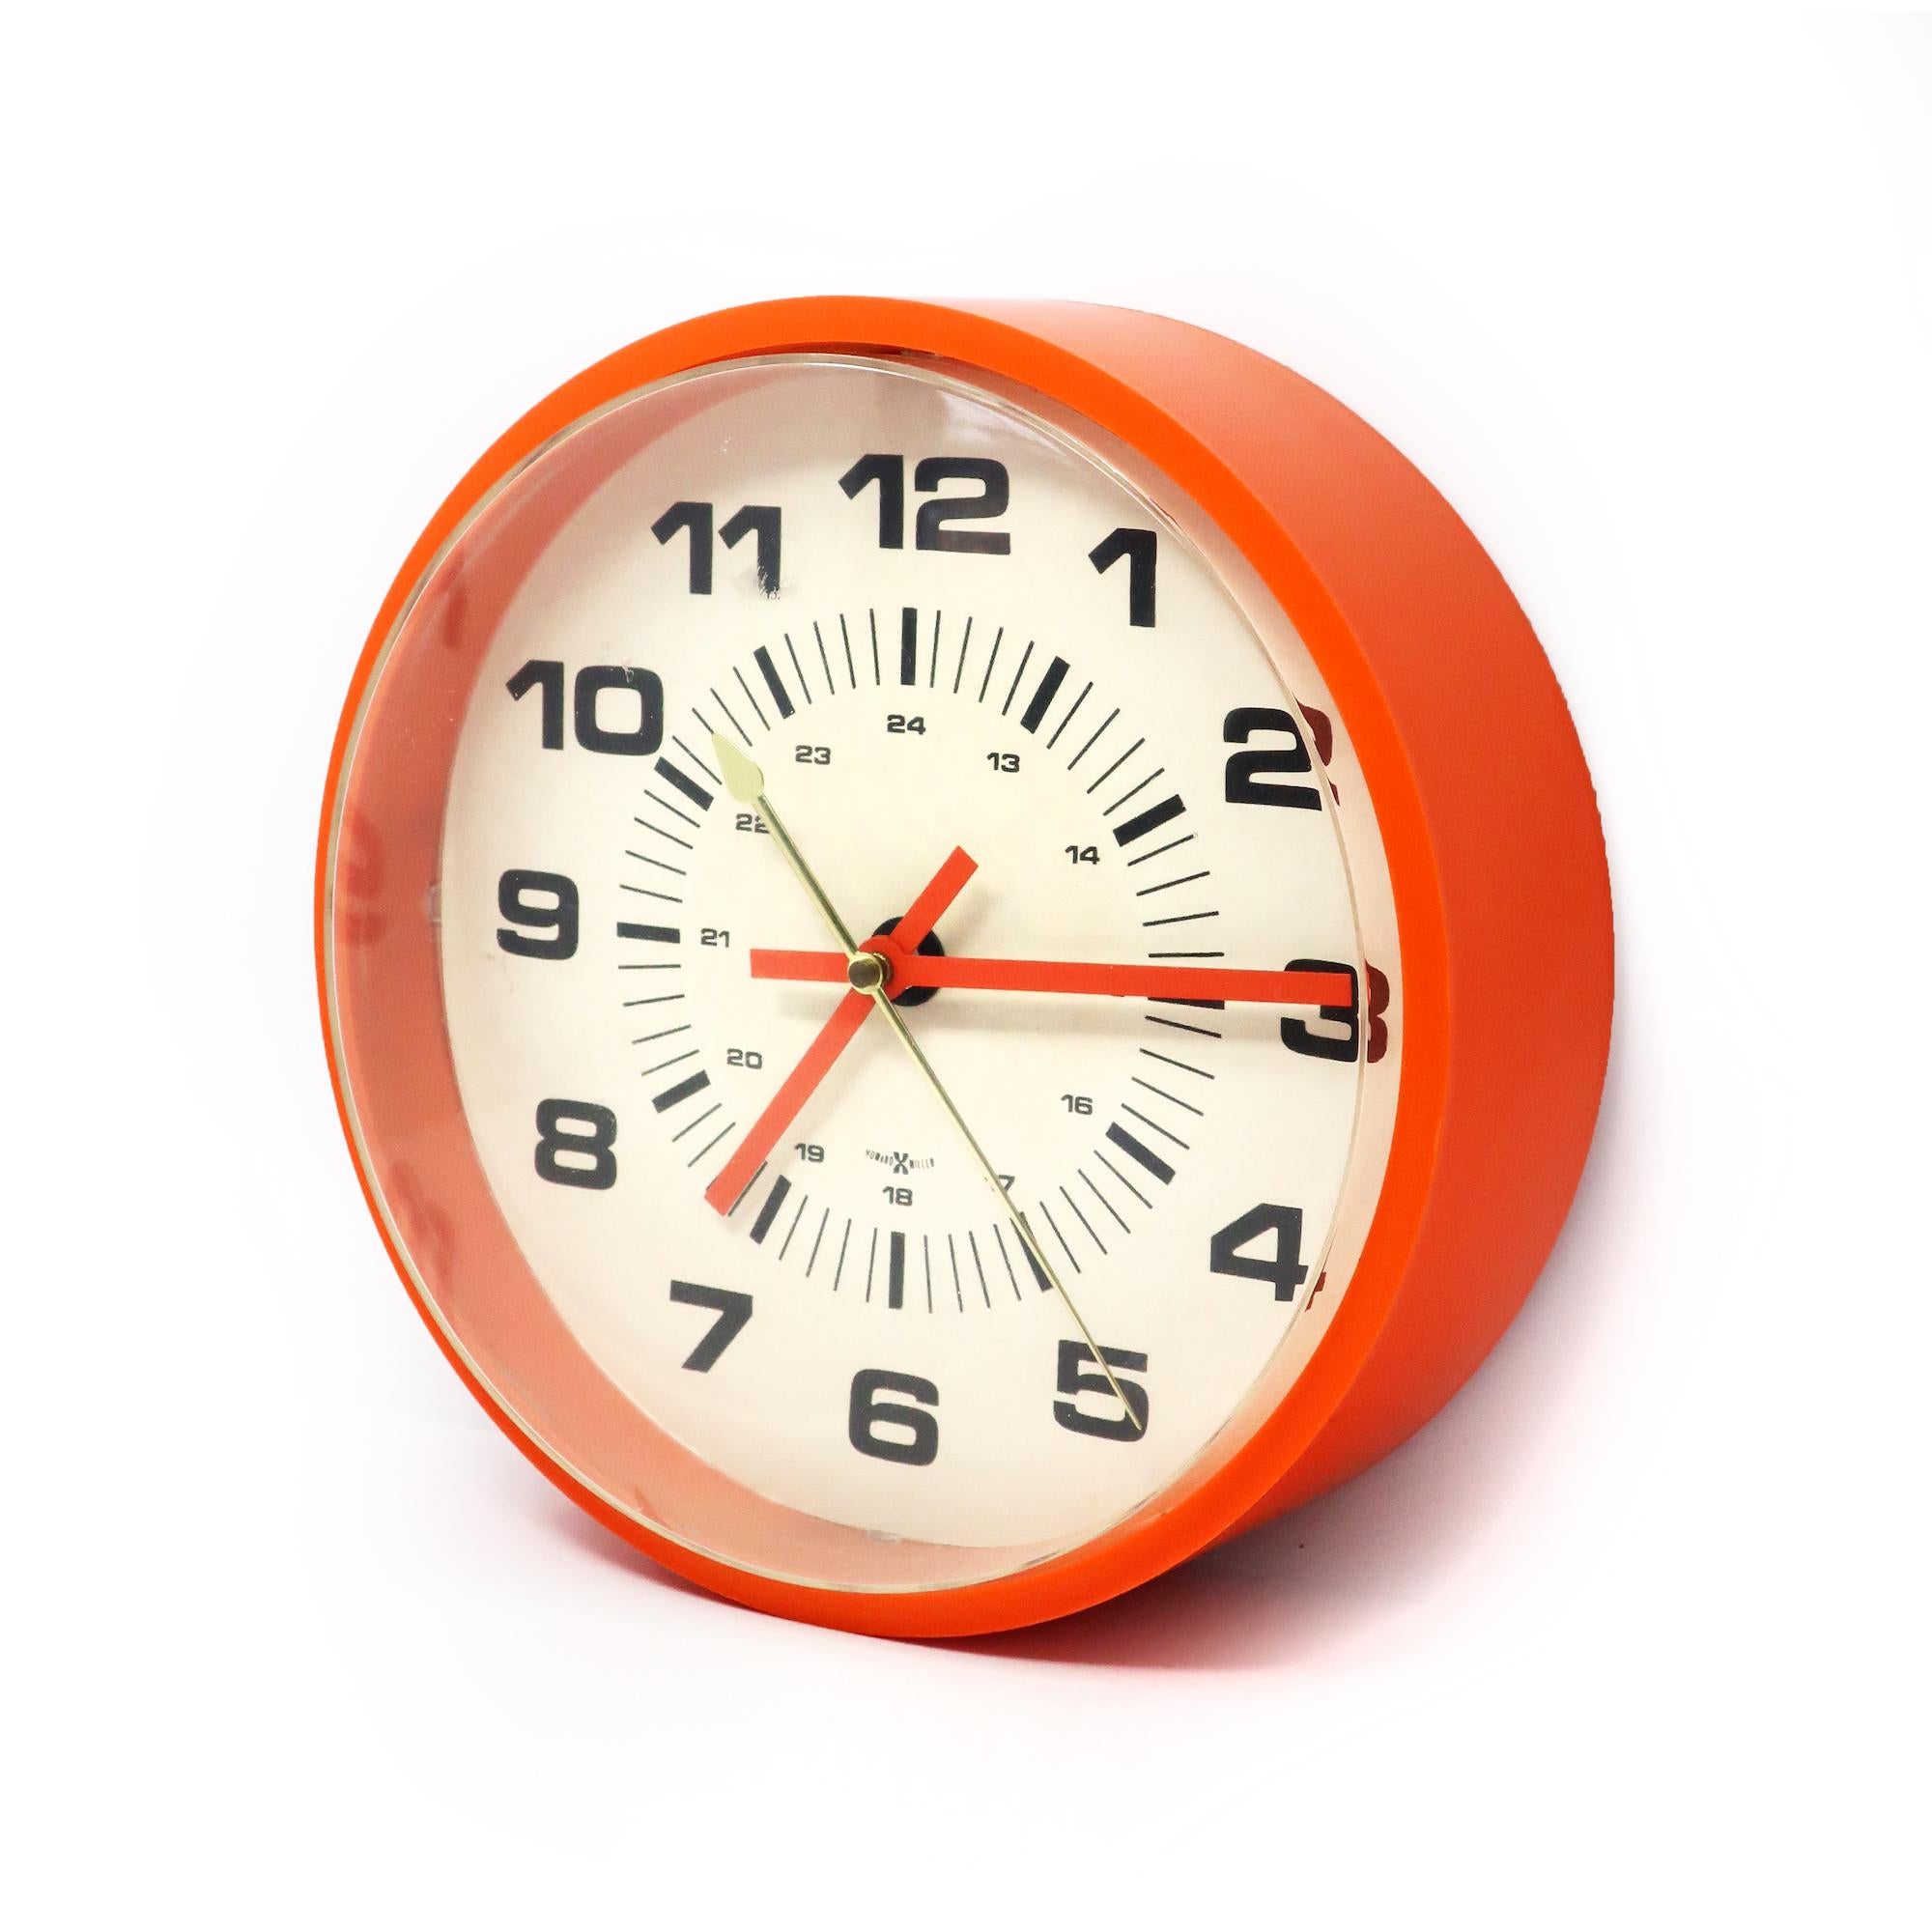 A perfectly Mid-Century Modern wall clock by Howard Miller with an orange plastic case, white face with black numbers, and orange and brass hands.

In good vintage condition with light scratching to cover (see photos). Plugs in and runs